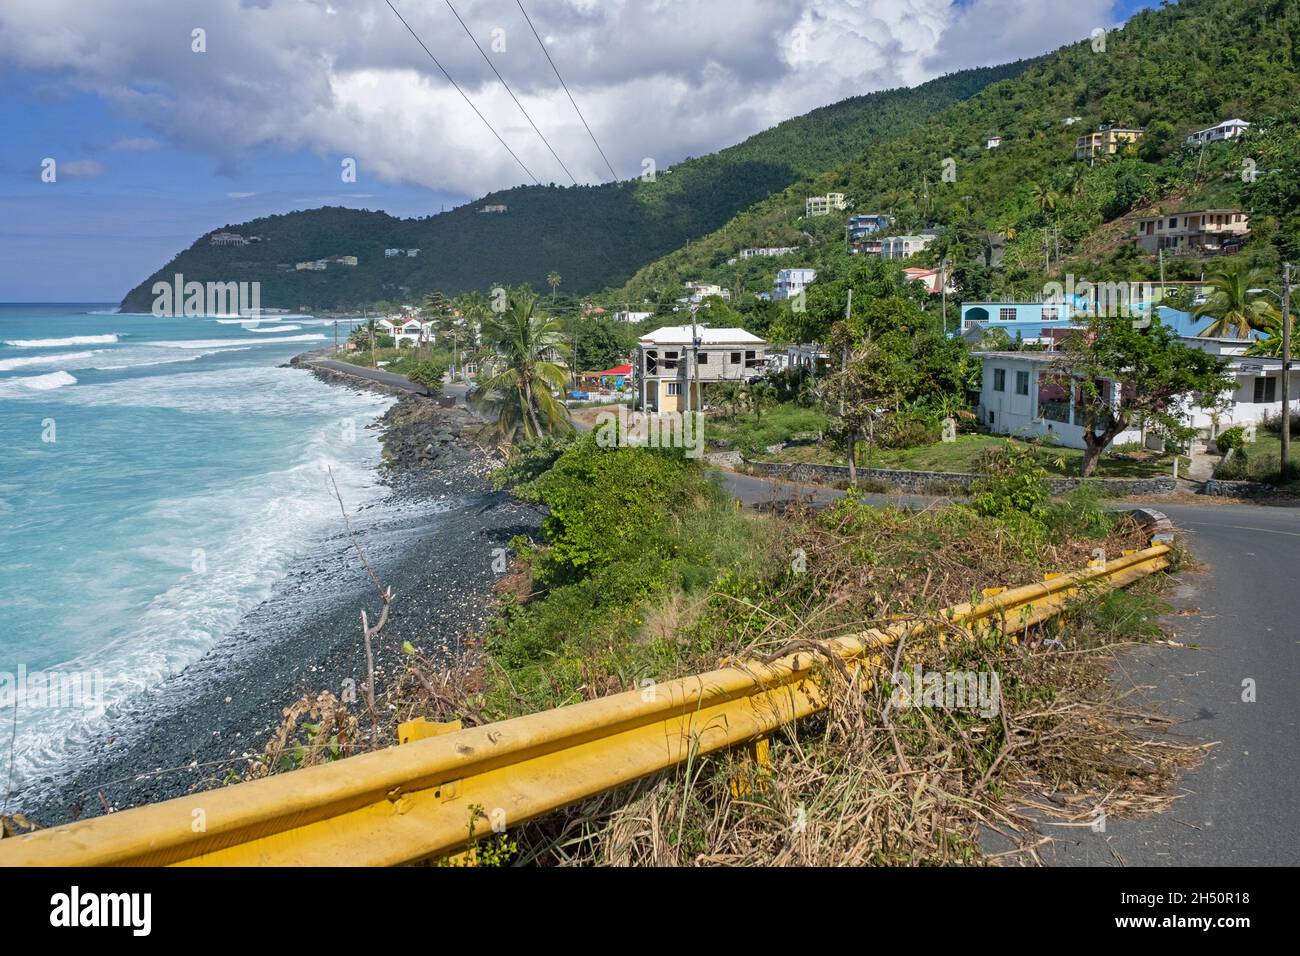 Coastal Route 1 along Cane Garden Bay on the northwestern side of the island Tortola, British Virgin Islands, Lesser Antilles in the Caribbean Sea Stock Photo